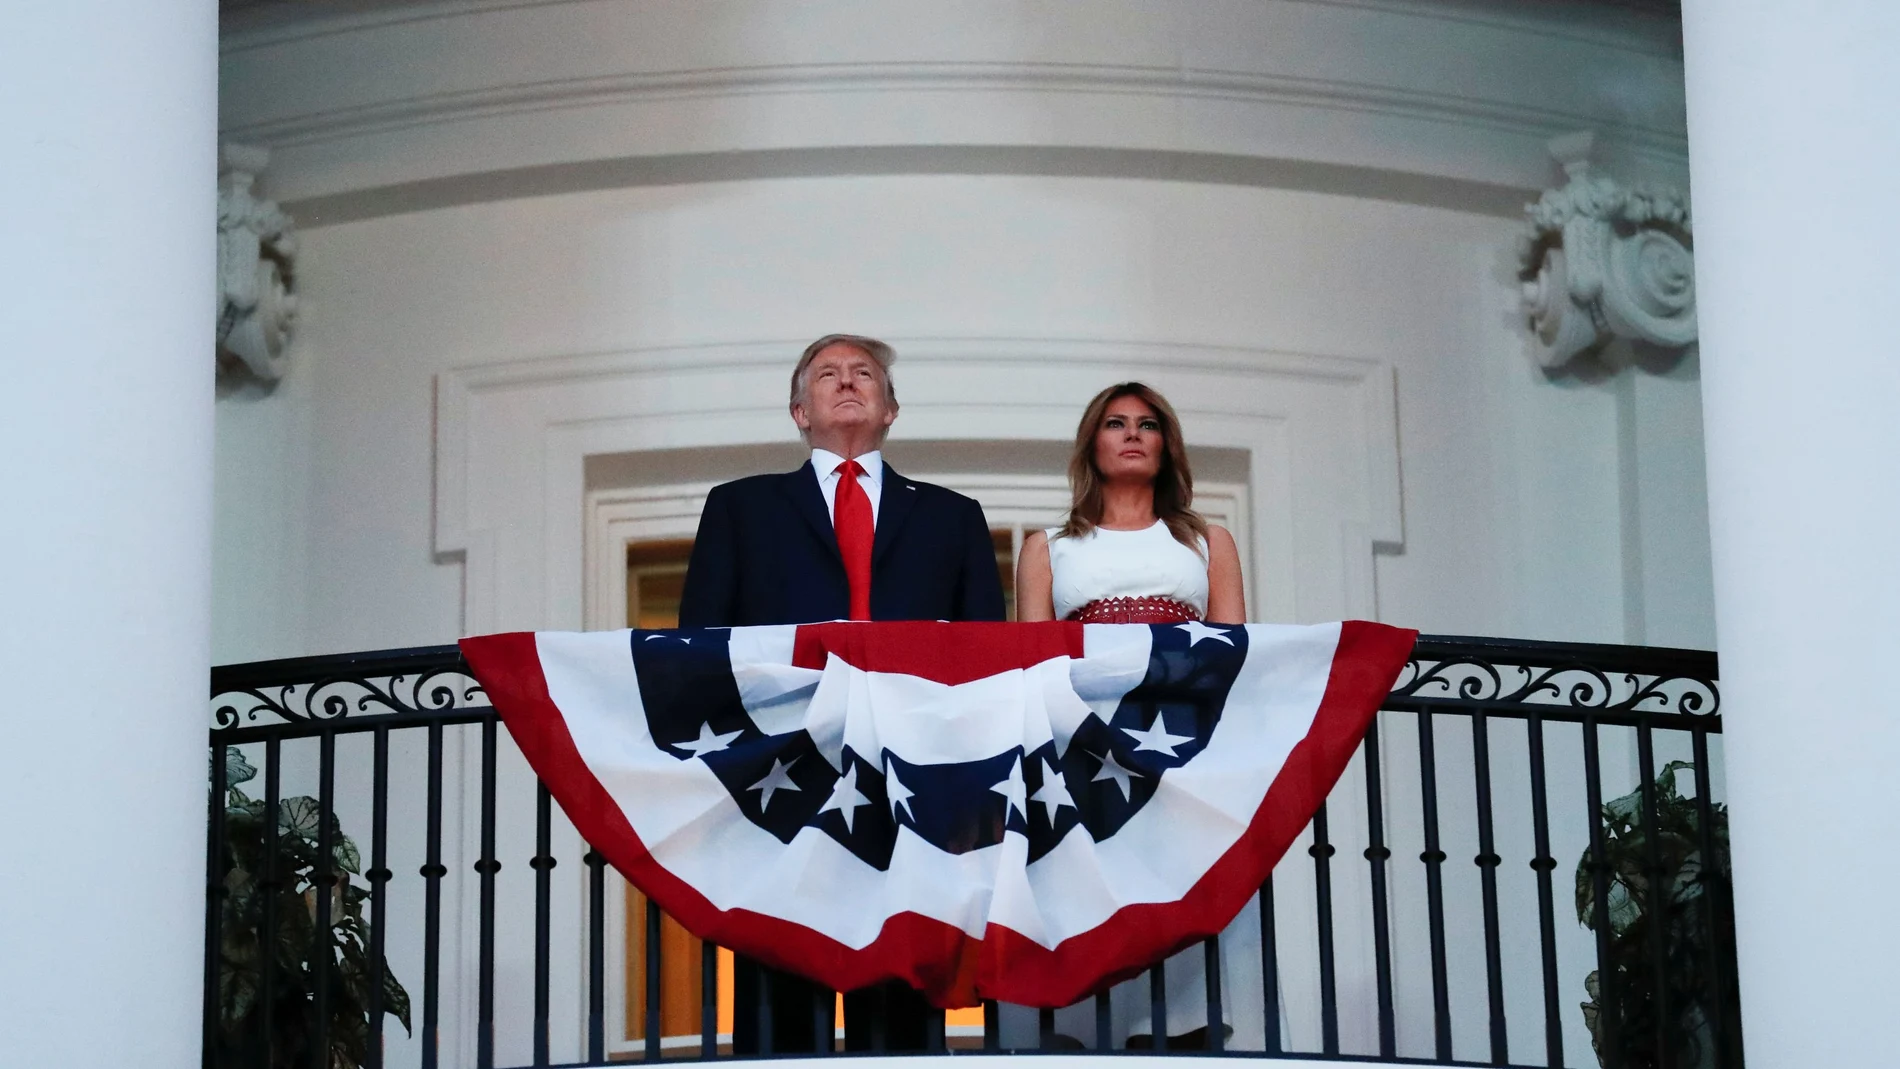 U.S. President Donald Trump celebrates 4th of July U.S. Independence Day at the White House in Washington